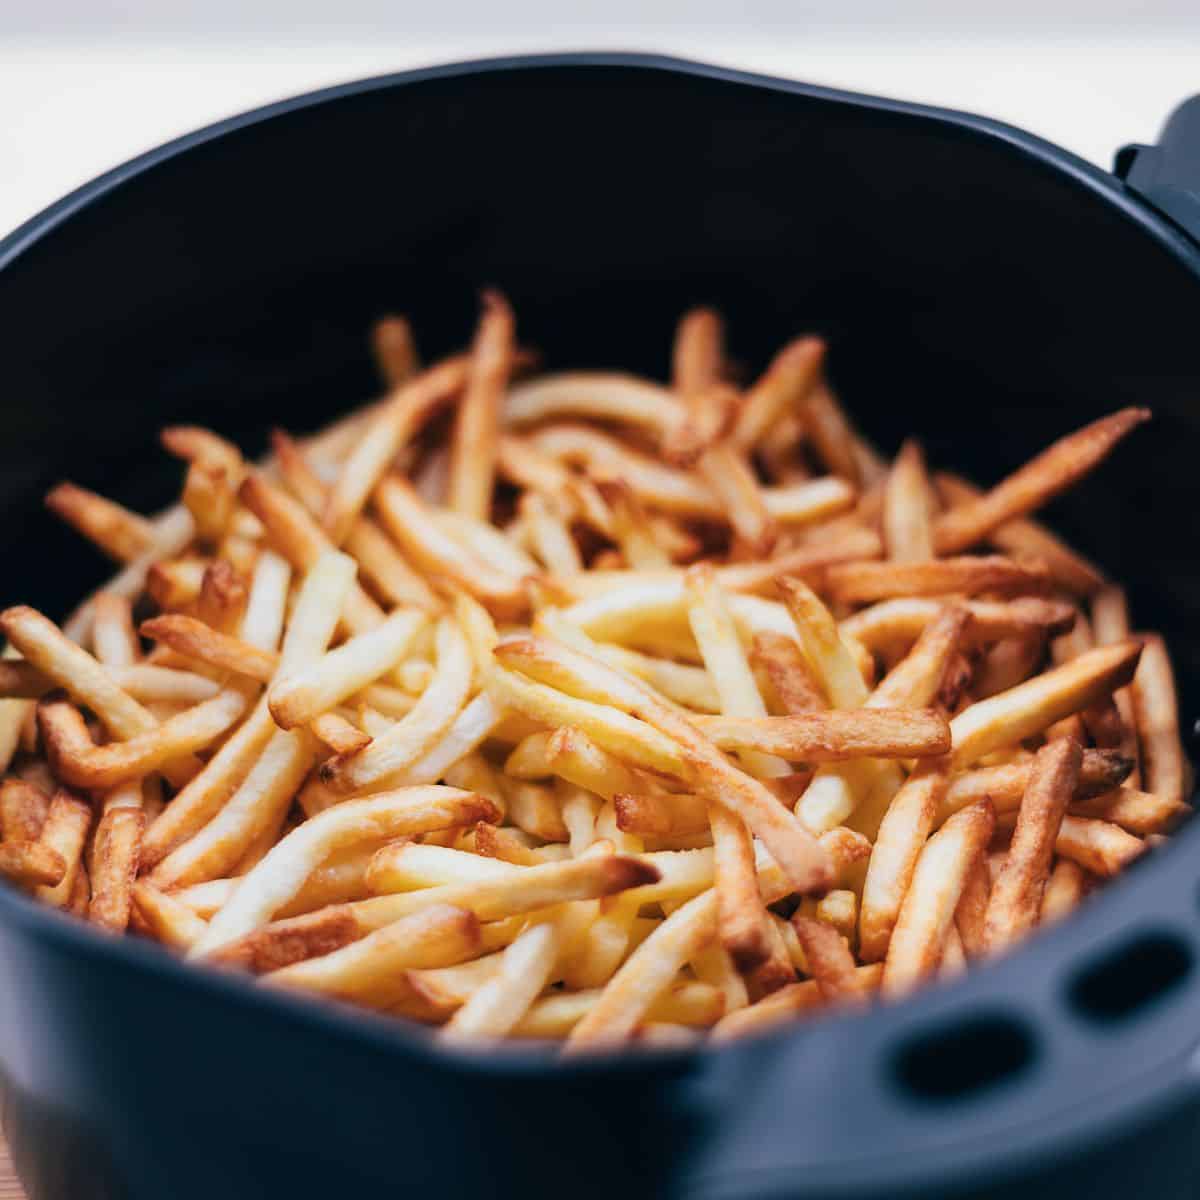 how to reheat fries in air fryer